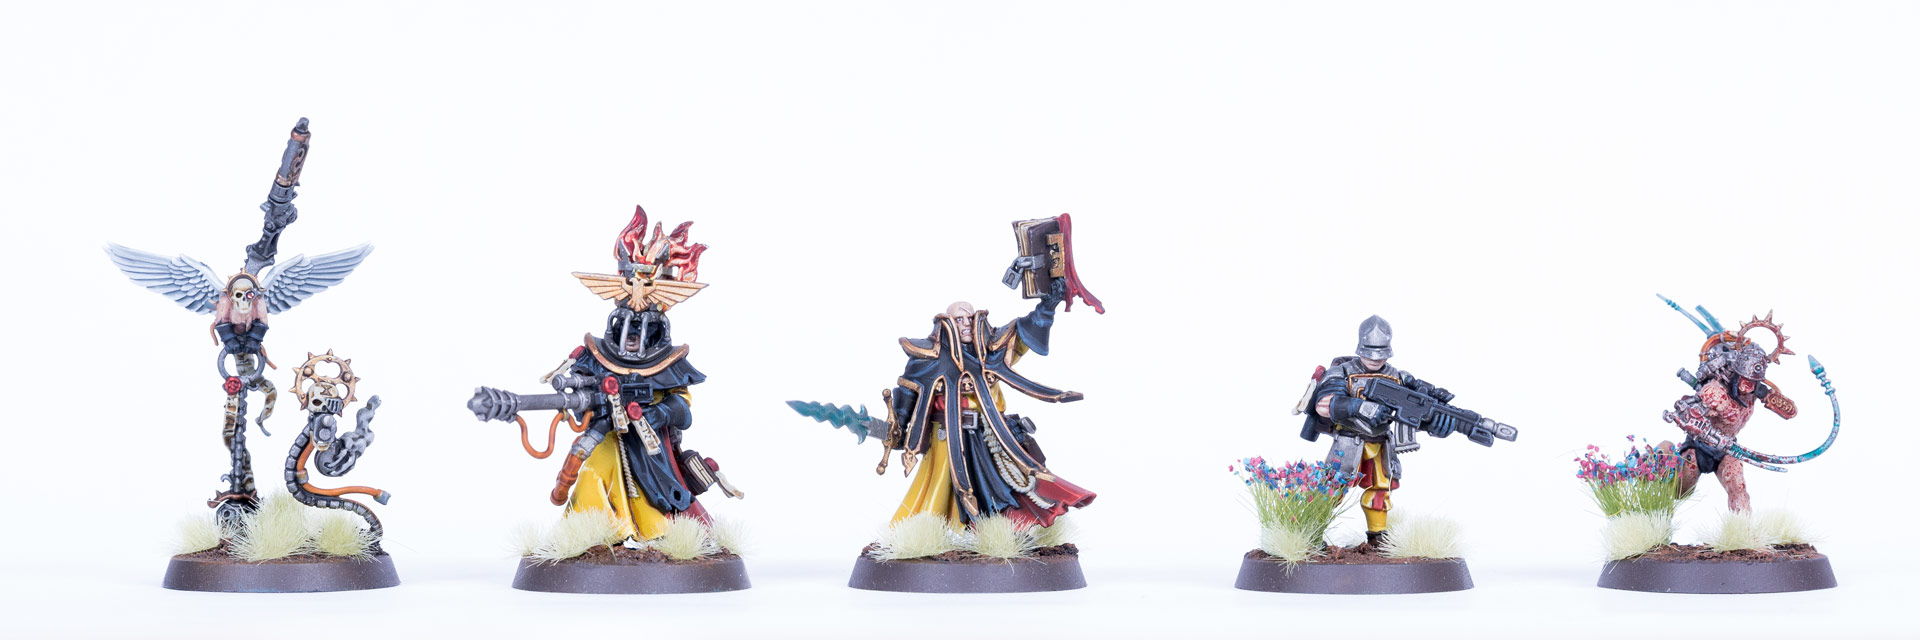 Kitbashes Inquisitorial retinue for Warhammer 40k